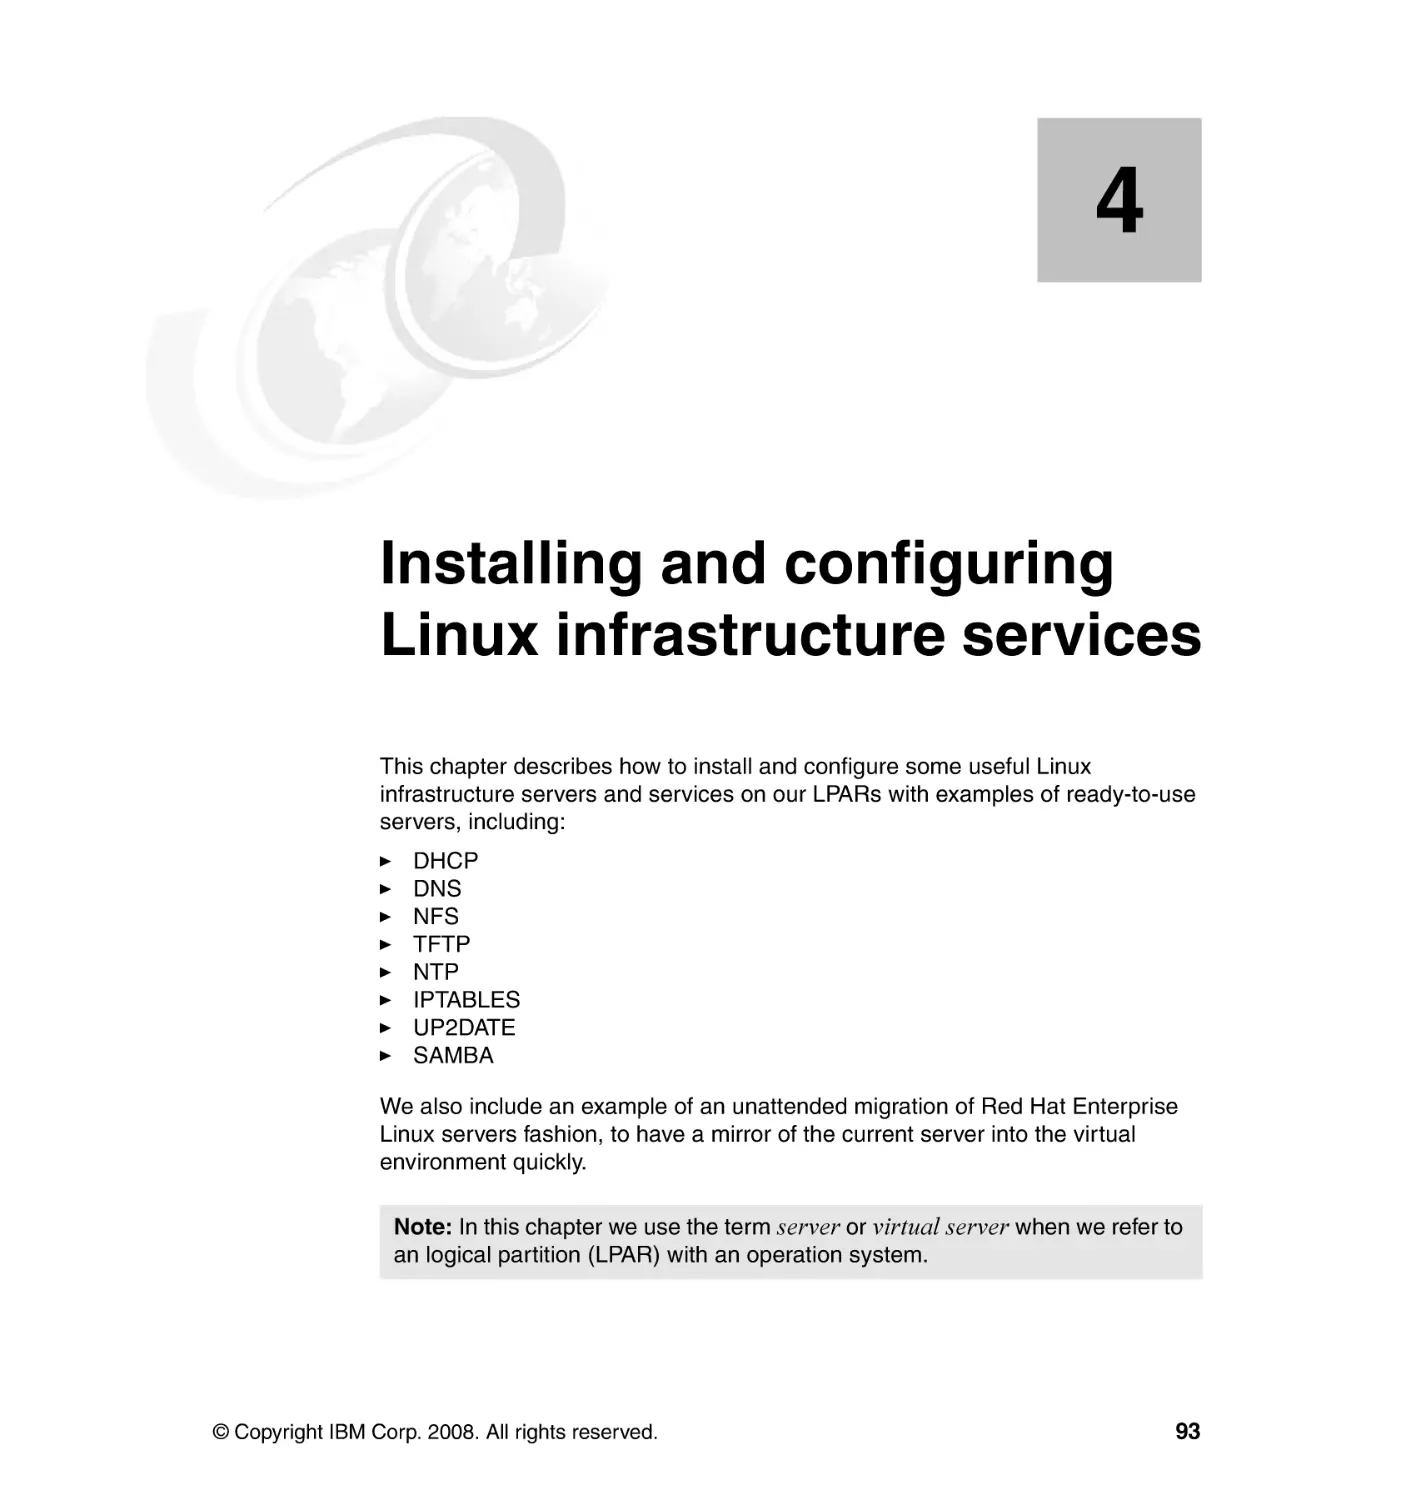 Chapter 4. Installing and configuring Linux infrastructure services